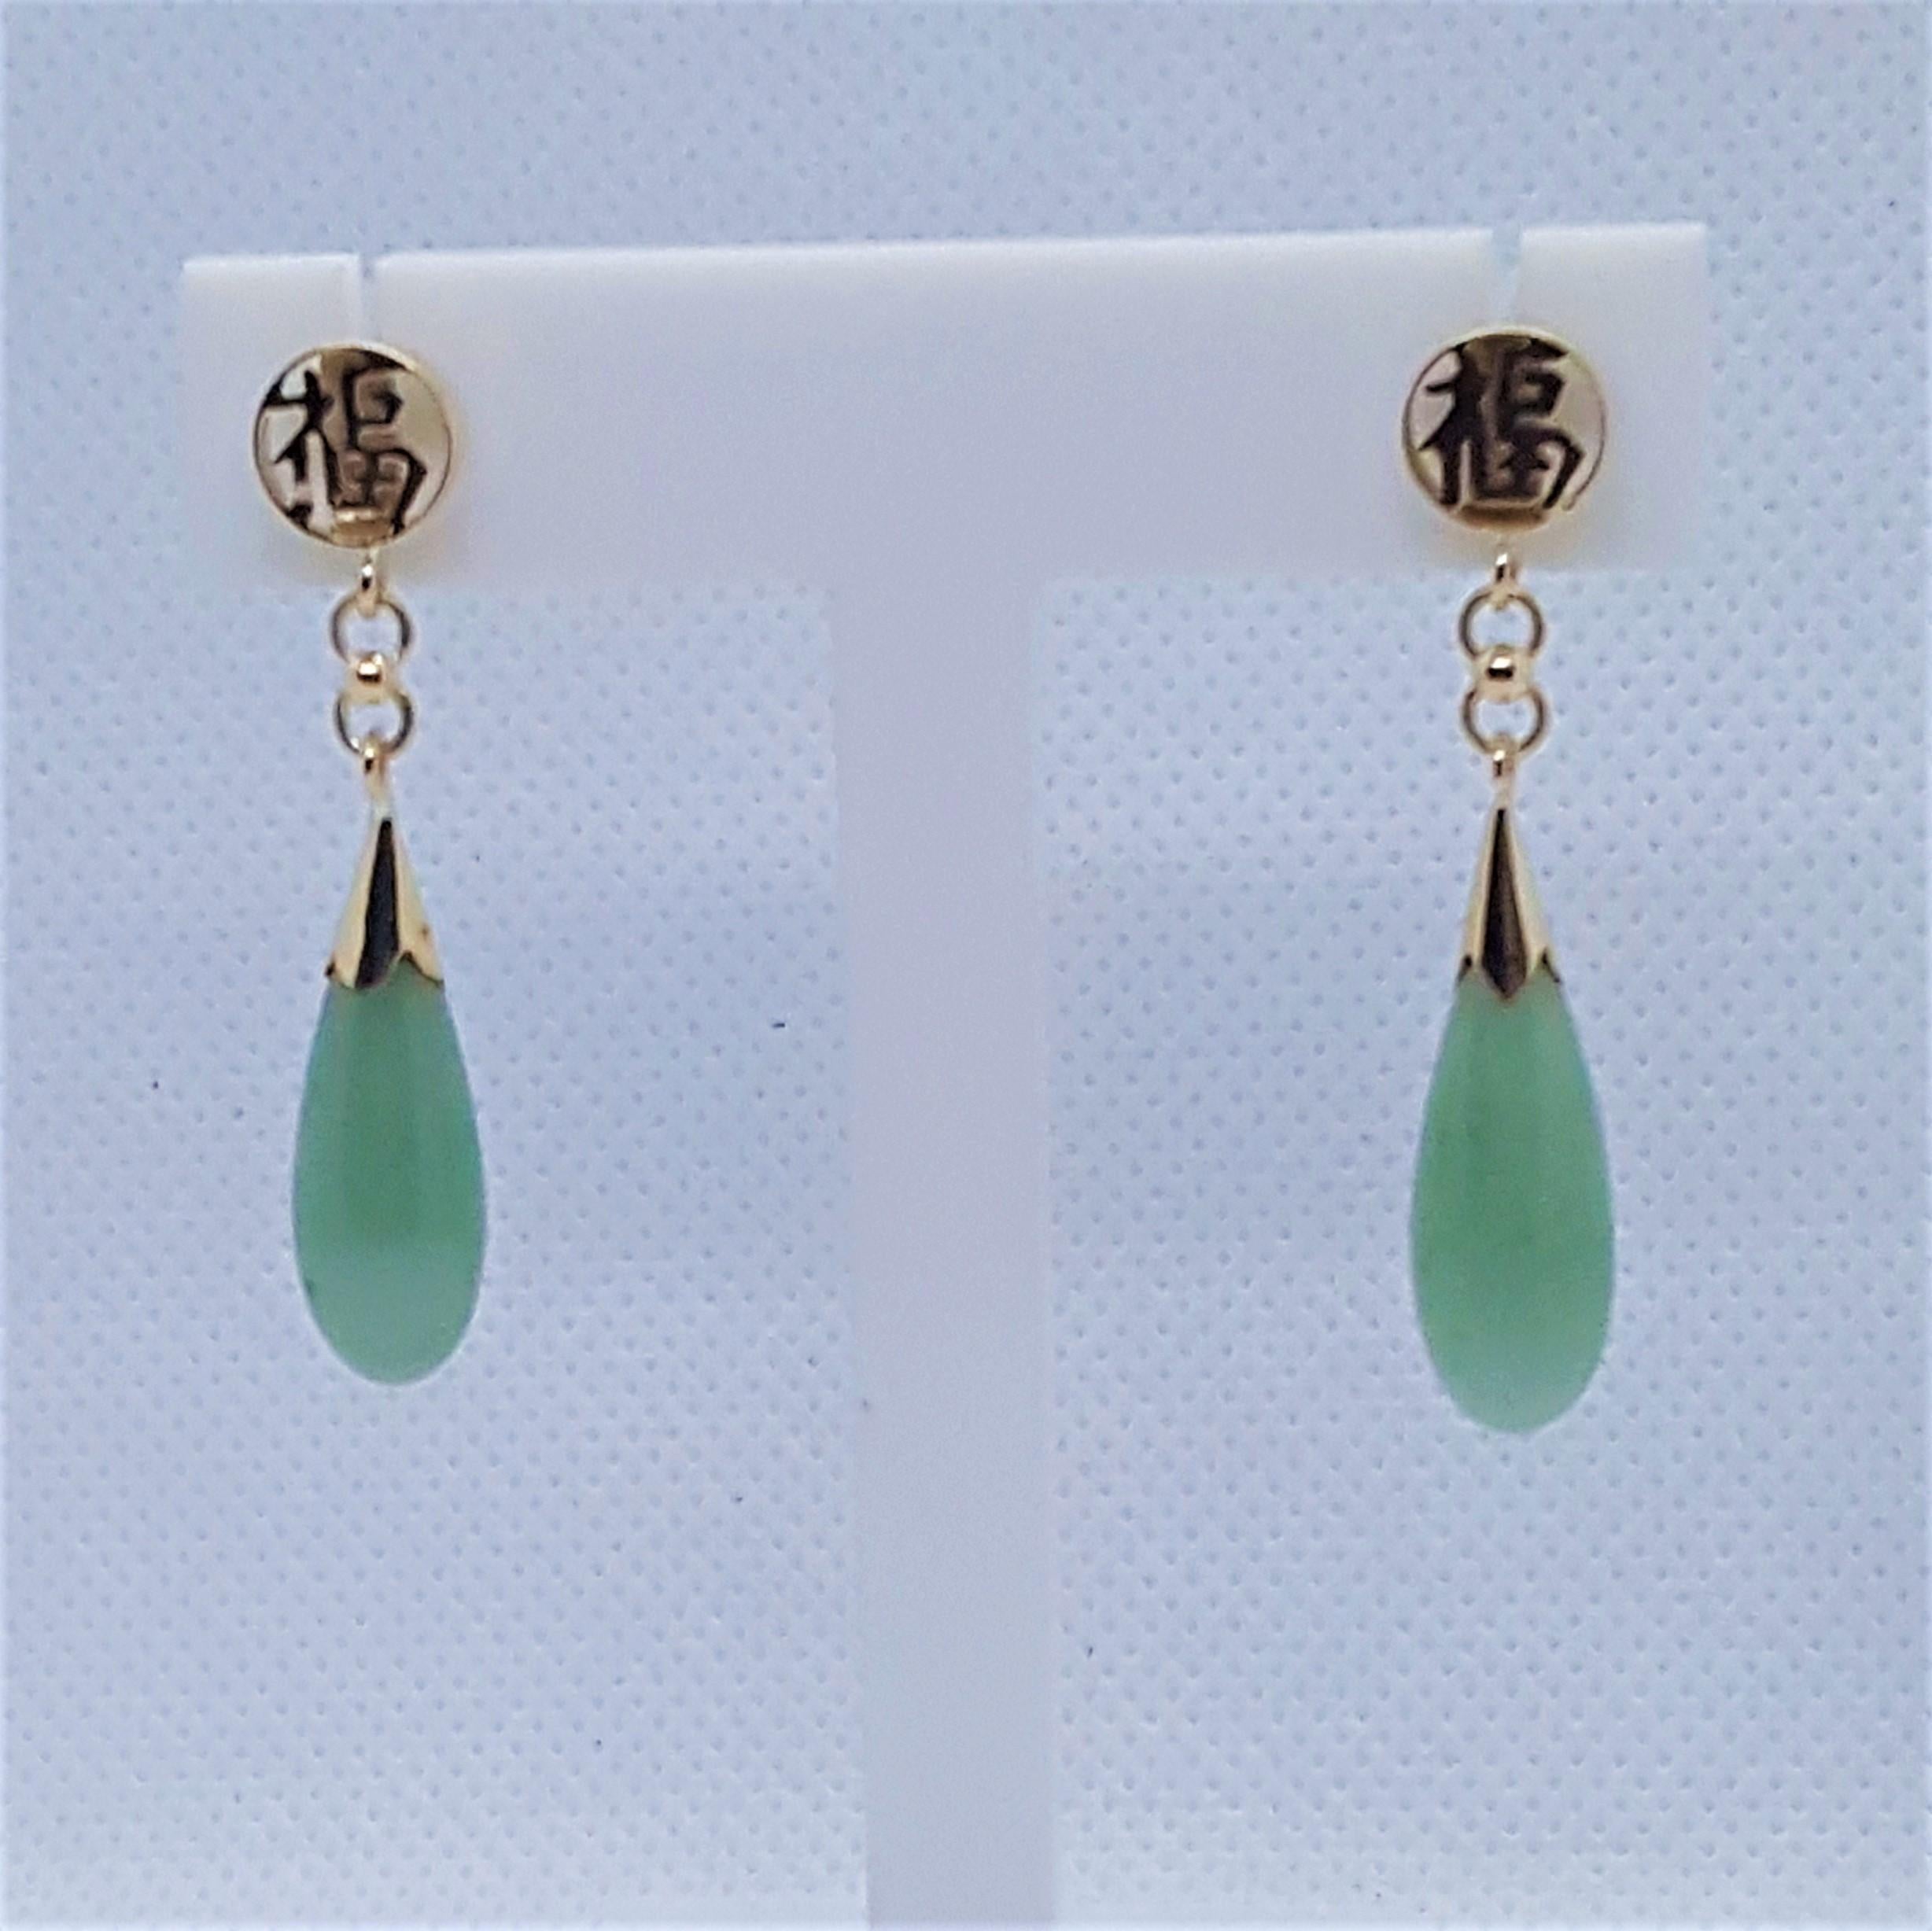 Lovely 14kt yellow gold friction post light green jade earrings with an Asian design. These earrings are in excellent condition, 6.4 grams total in weight, and appear hardly worn and like new. The diameter of the round Asian design and the widest